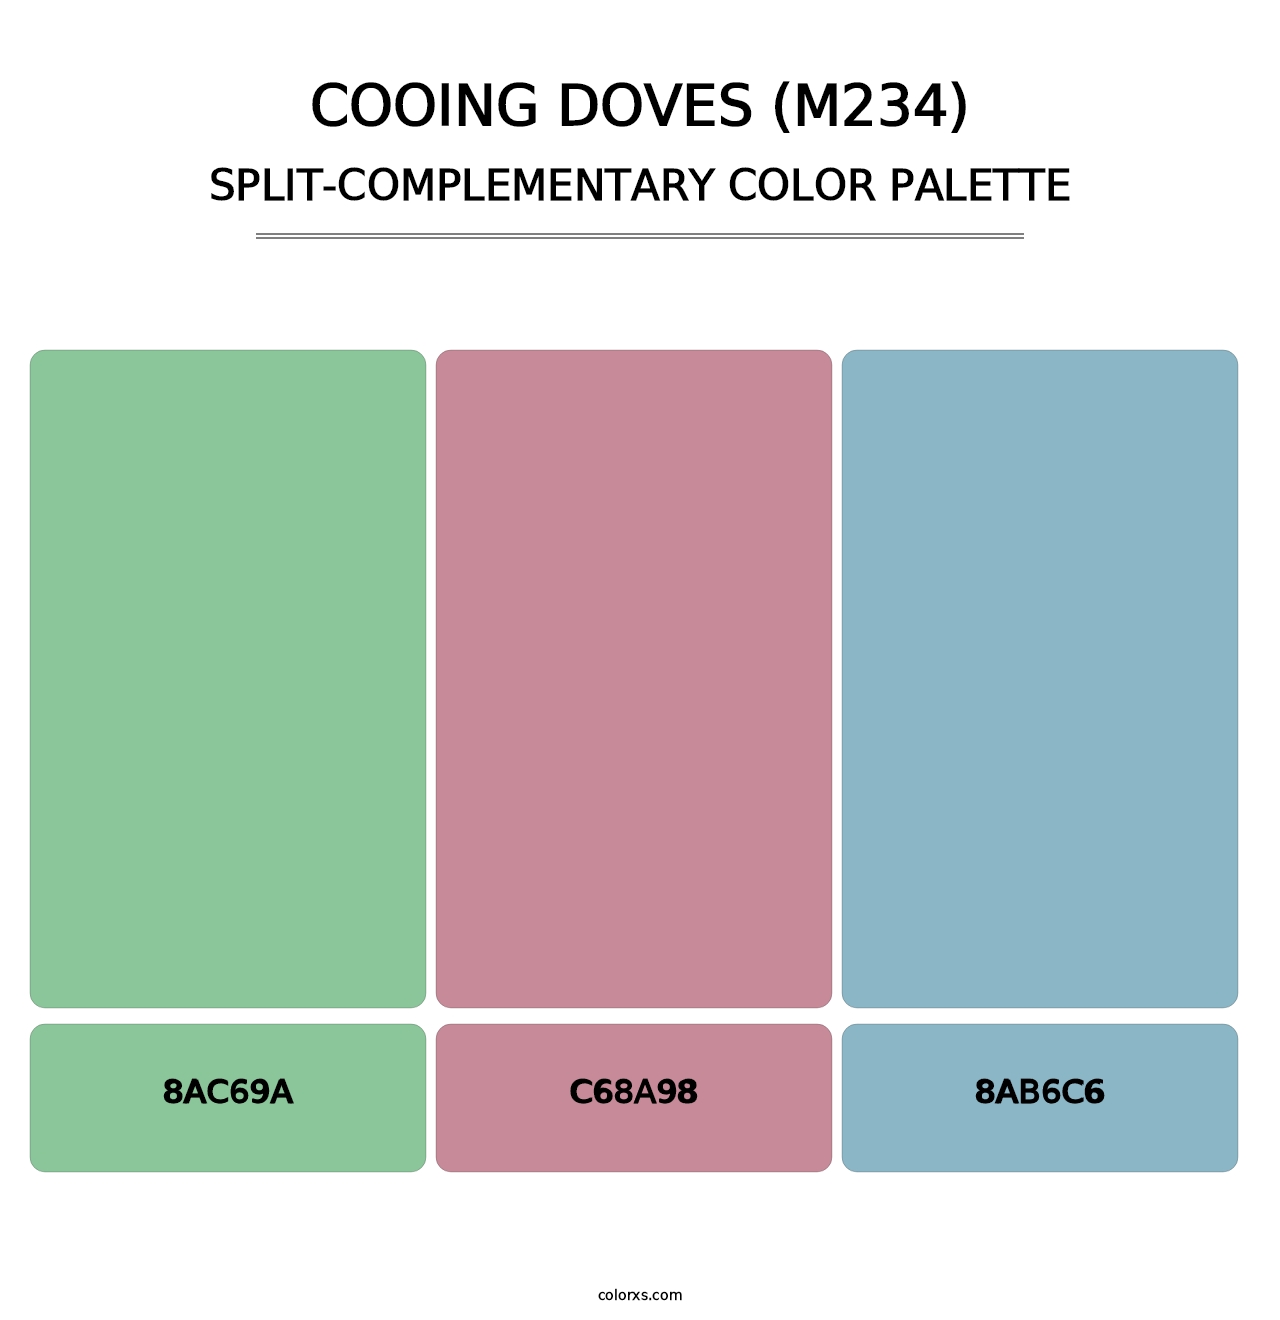 Cooing Doves (M234) - Split-Complementary Color Palette